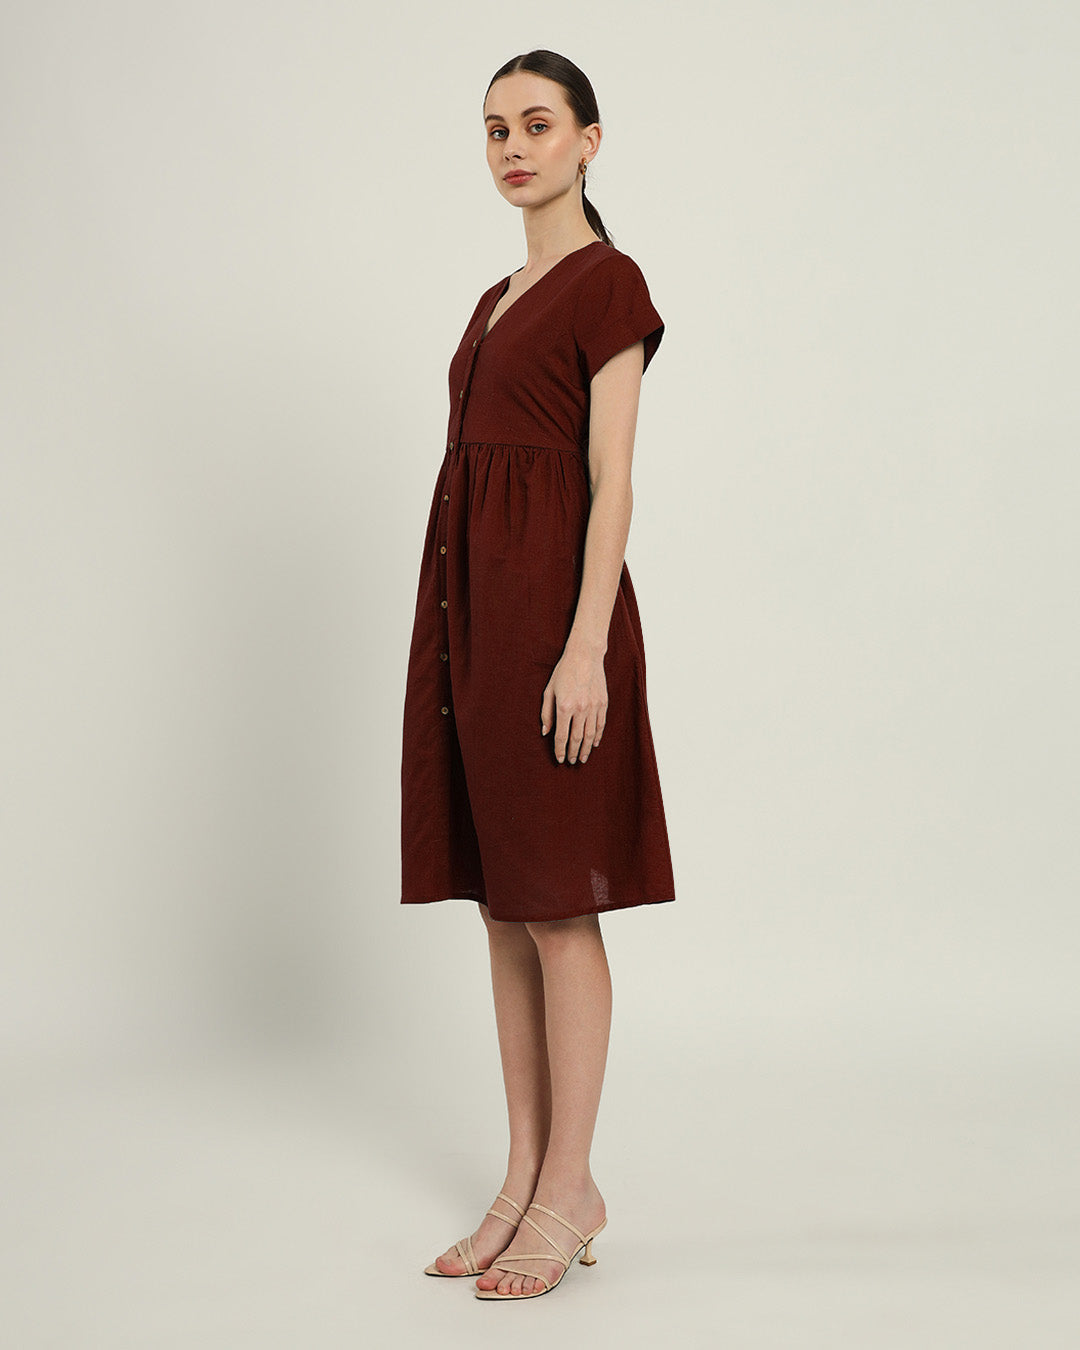 The Valence Rouge Cotton Dress